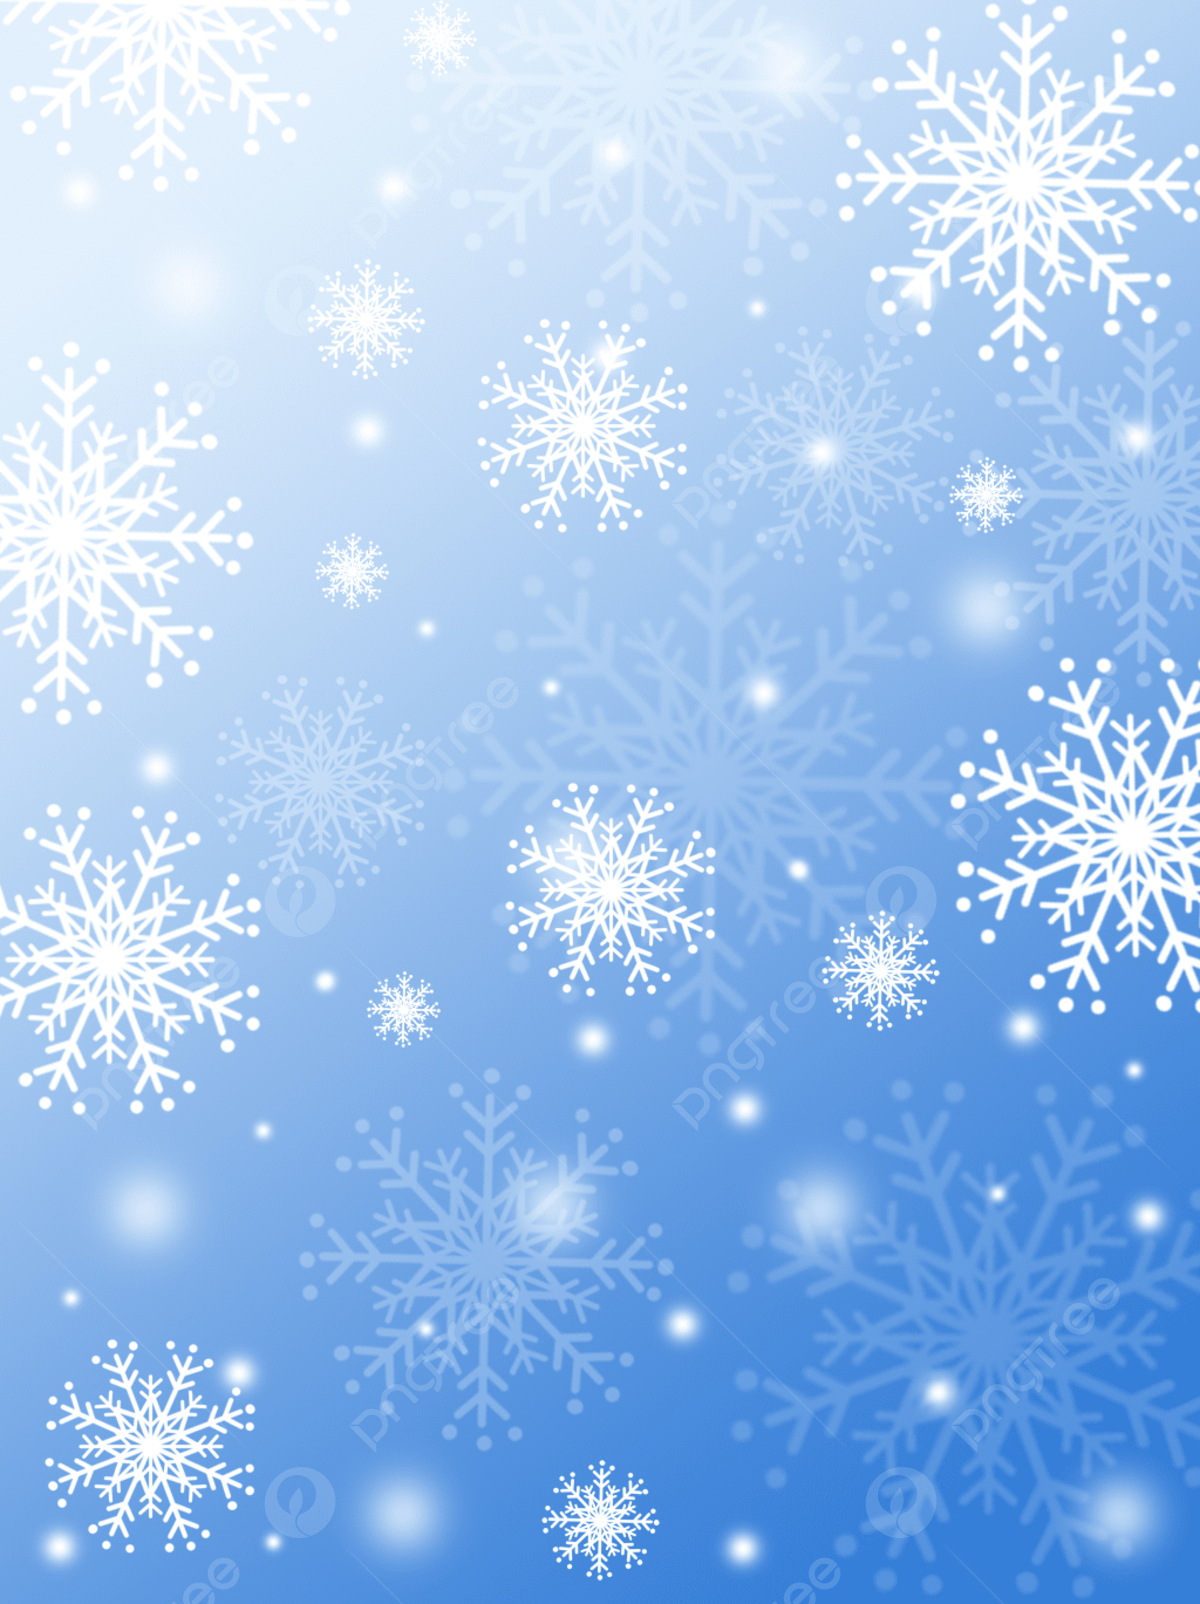 Winter Aesthetic Background Image, HD Picture and Wallpaper For Free Download